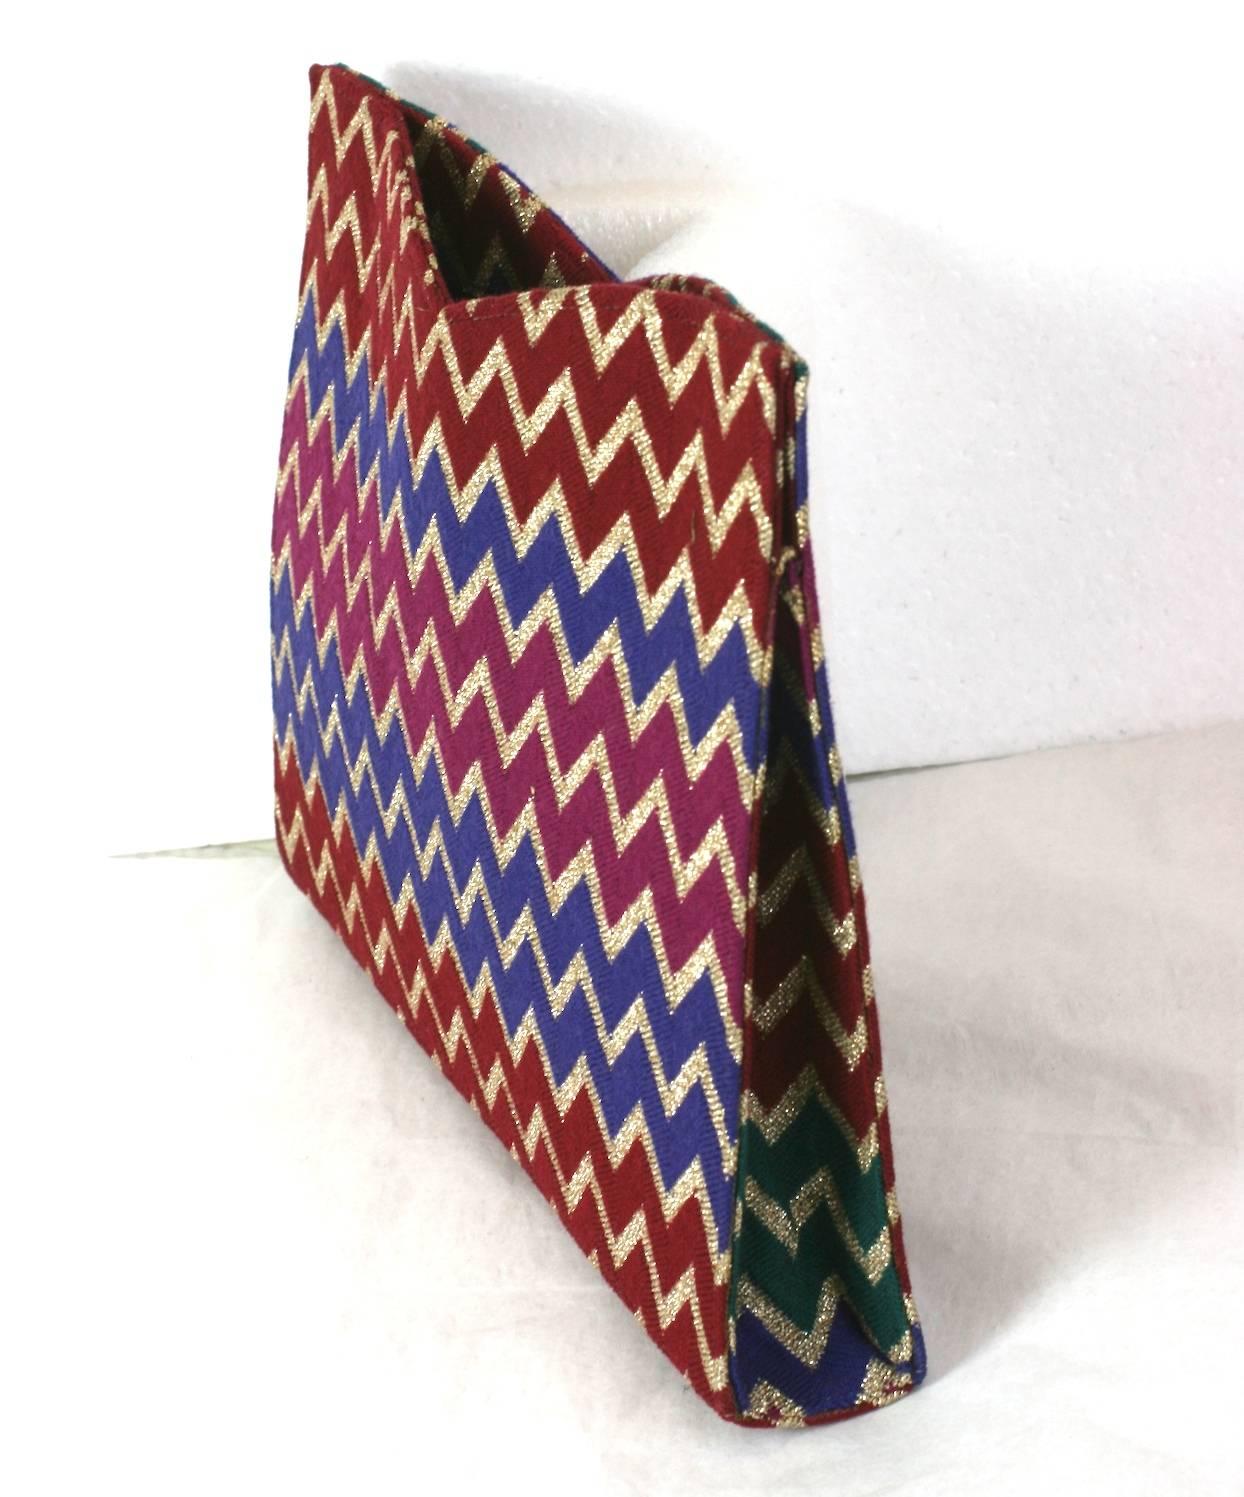 Missoni signature jersey knit clutch bag of gold lurex, burgundy, purple and magenta zig-zags motifs with vivid emerald green sides. Backed on a hard satin base with magnetic closures. 1980's Italy. Excellent Condition.
L 10